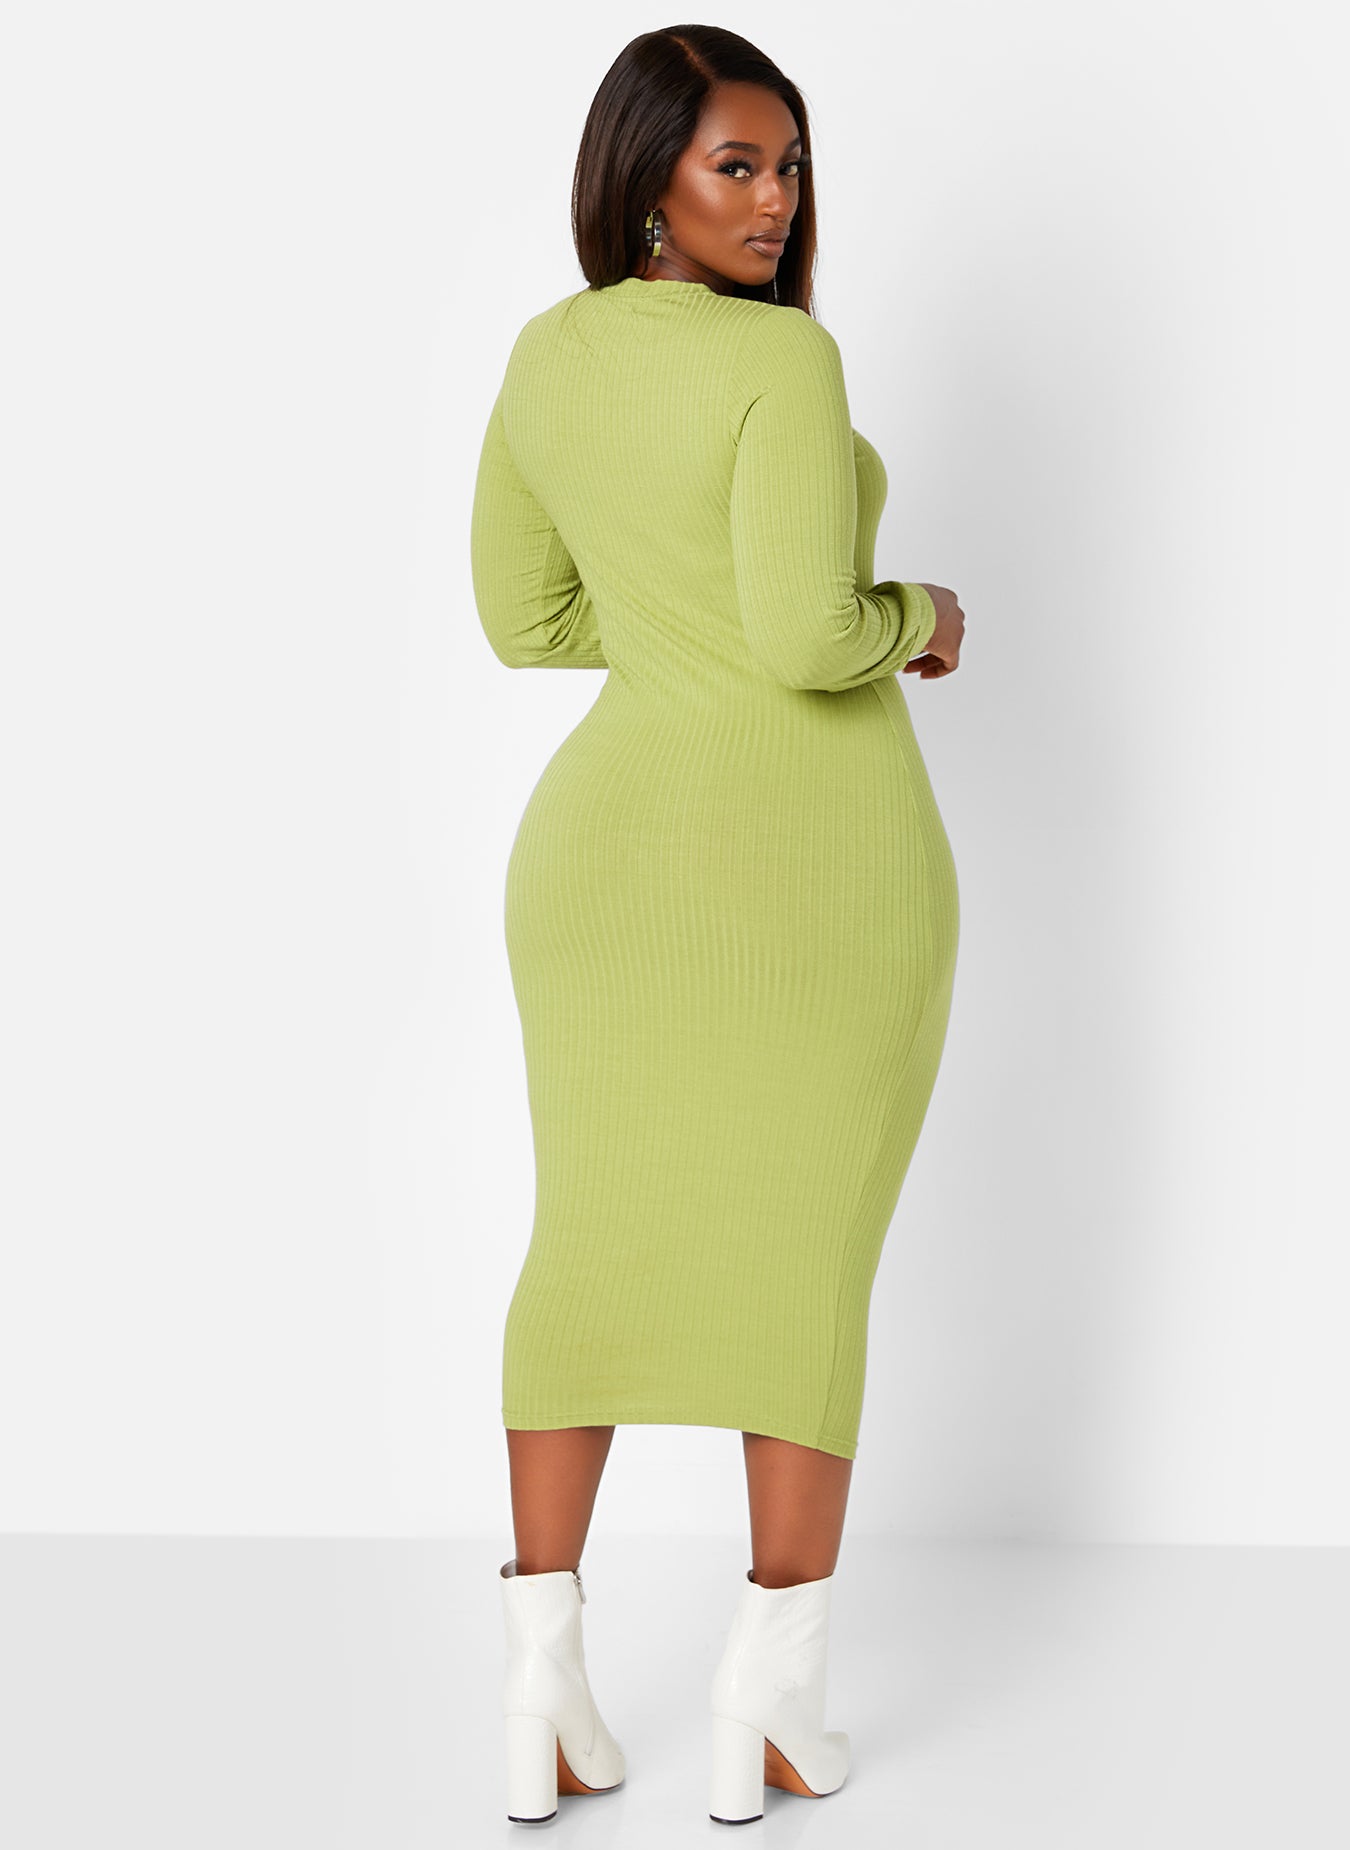 Moss Green Simpler Things Ribbed Bodycon Midi Dress Plus Sizes